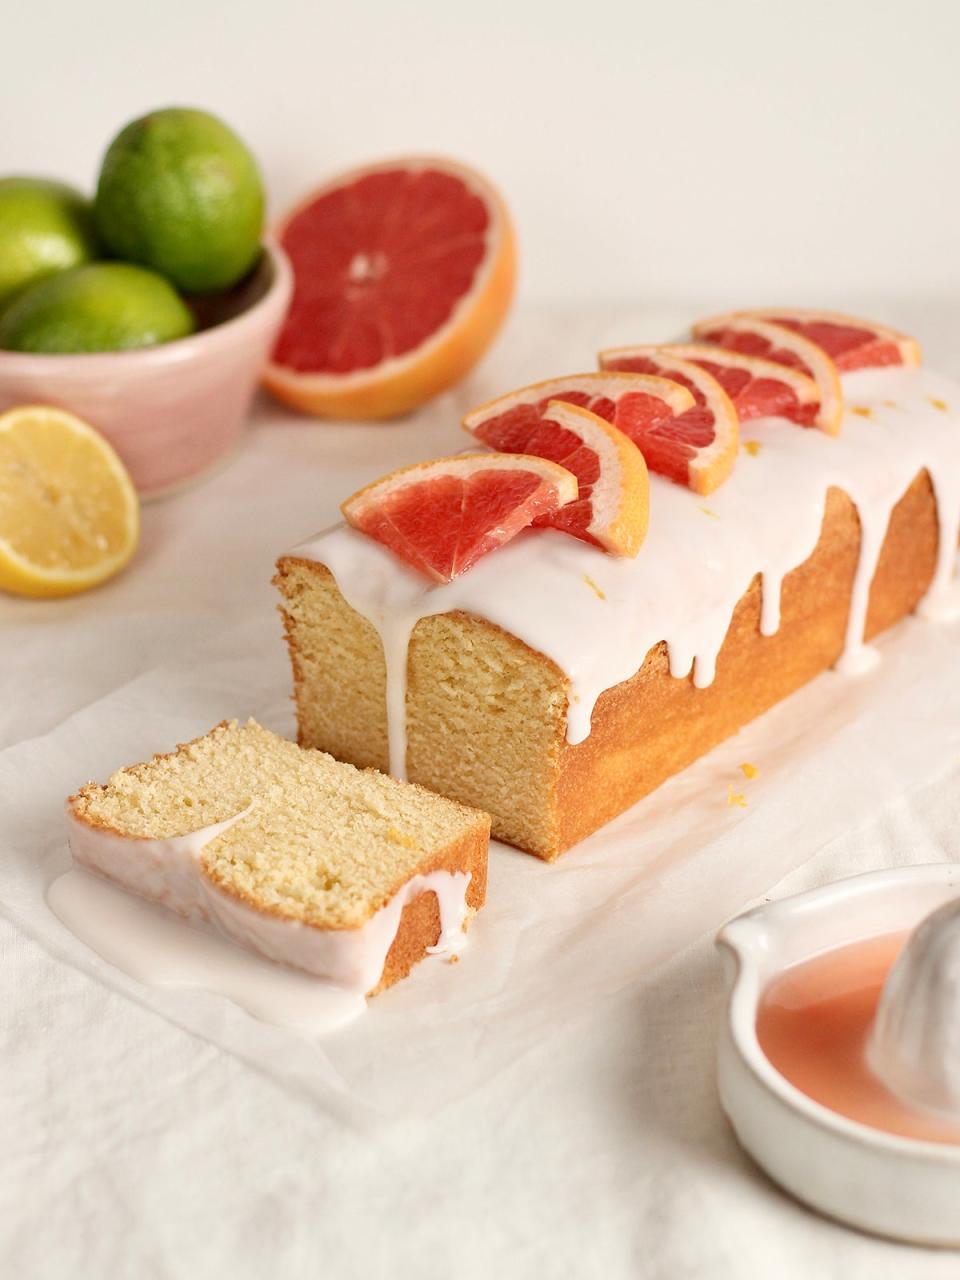 A crowd pleaser and a showstopper all mixed into one simple cake. Make this your go-to summer recipe (FAB Flour)